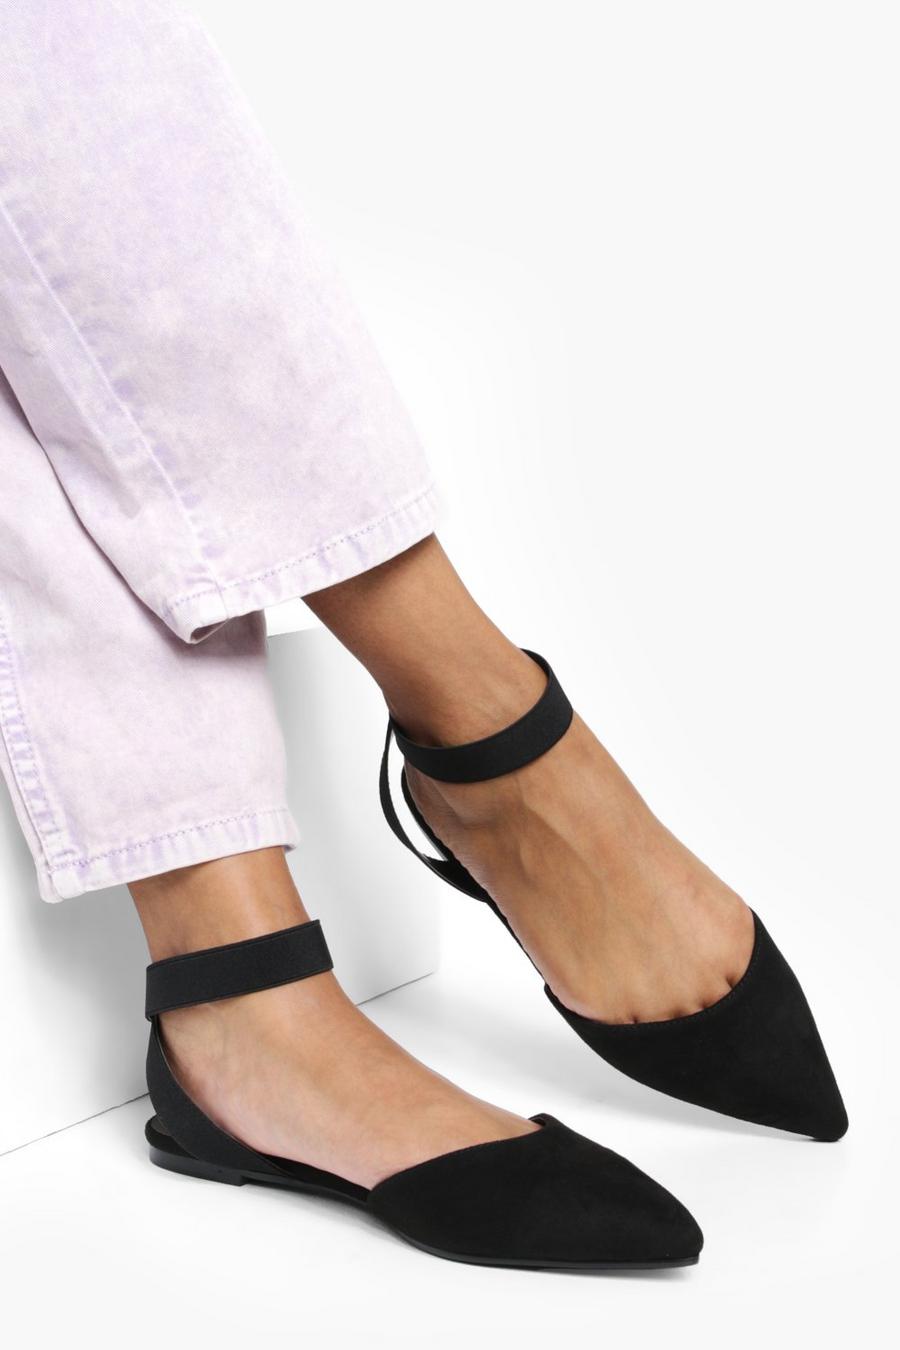 Black Wide Width Elastic Strap Pointed Flats